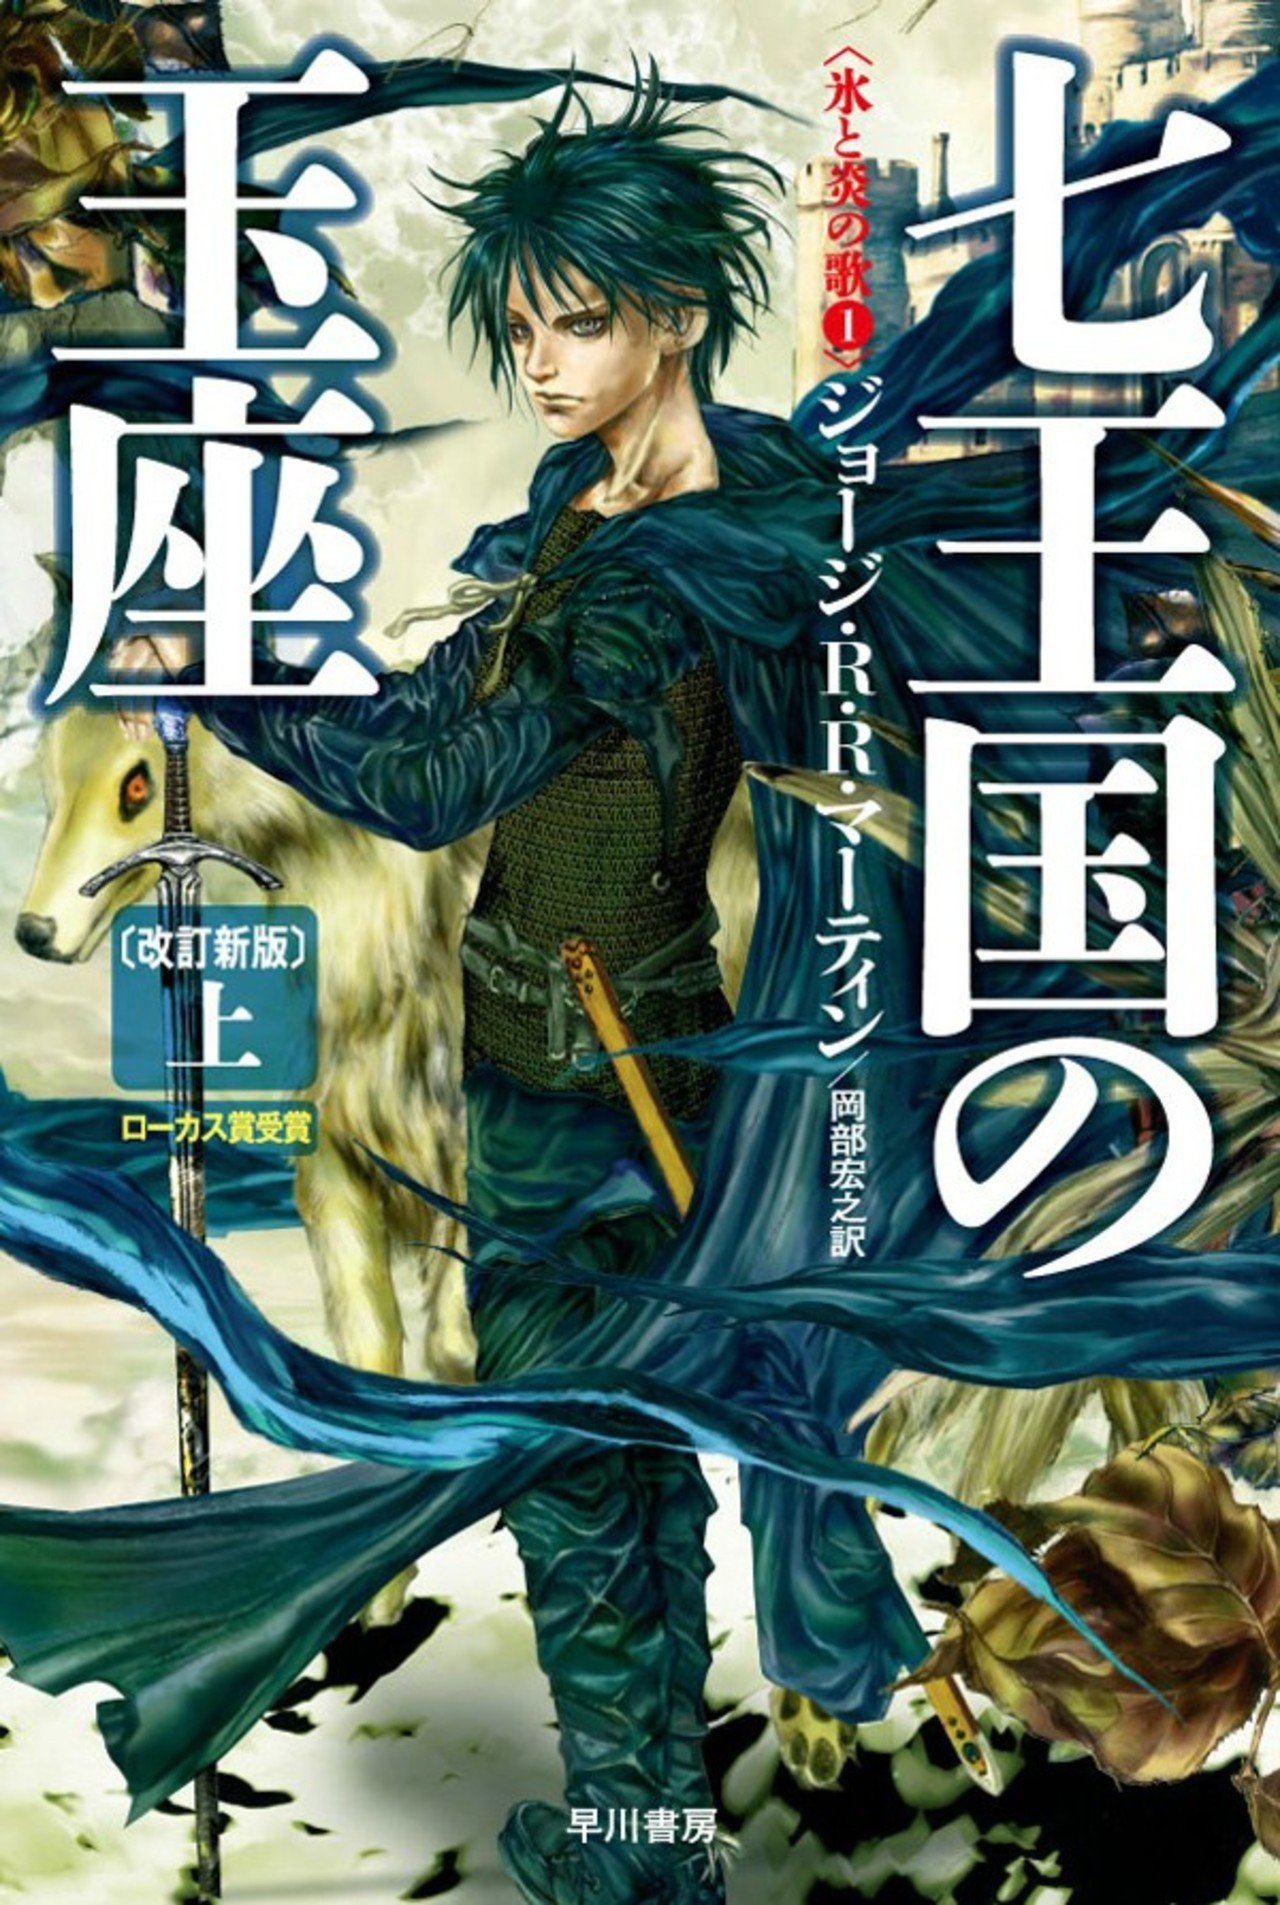 These Game of Thrones Anime-Inspired Japanese Book Covers Are Amazing -  Rice Digital